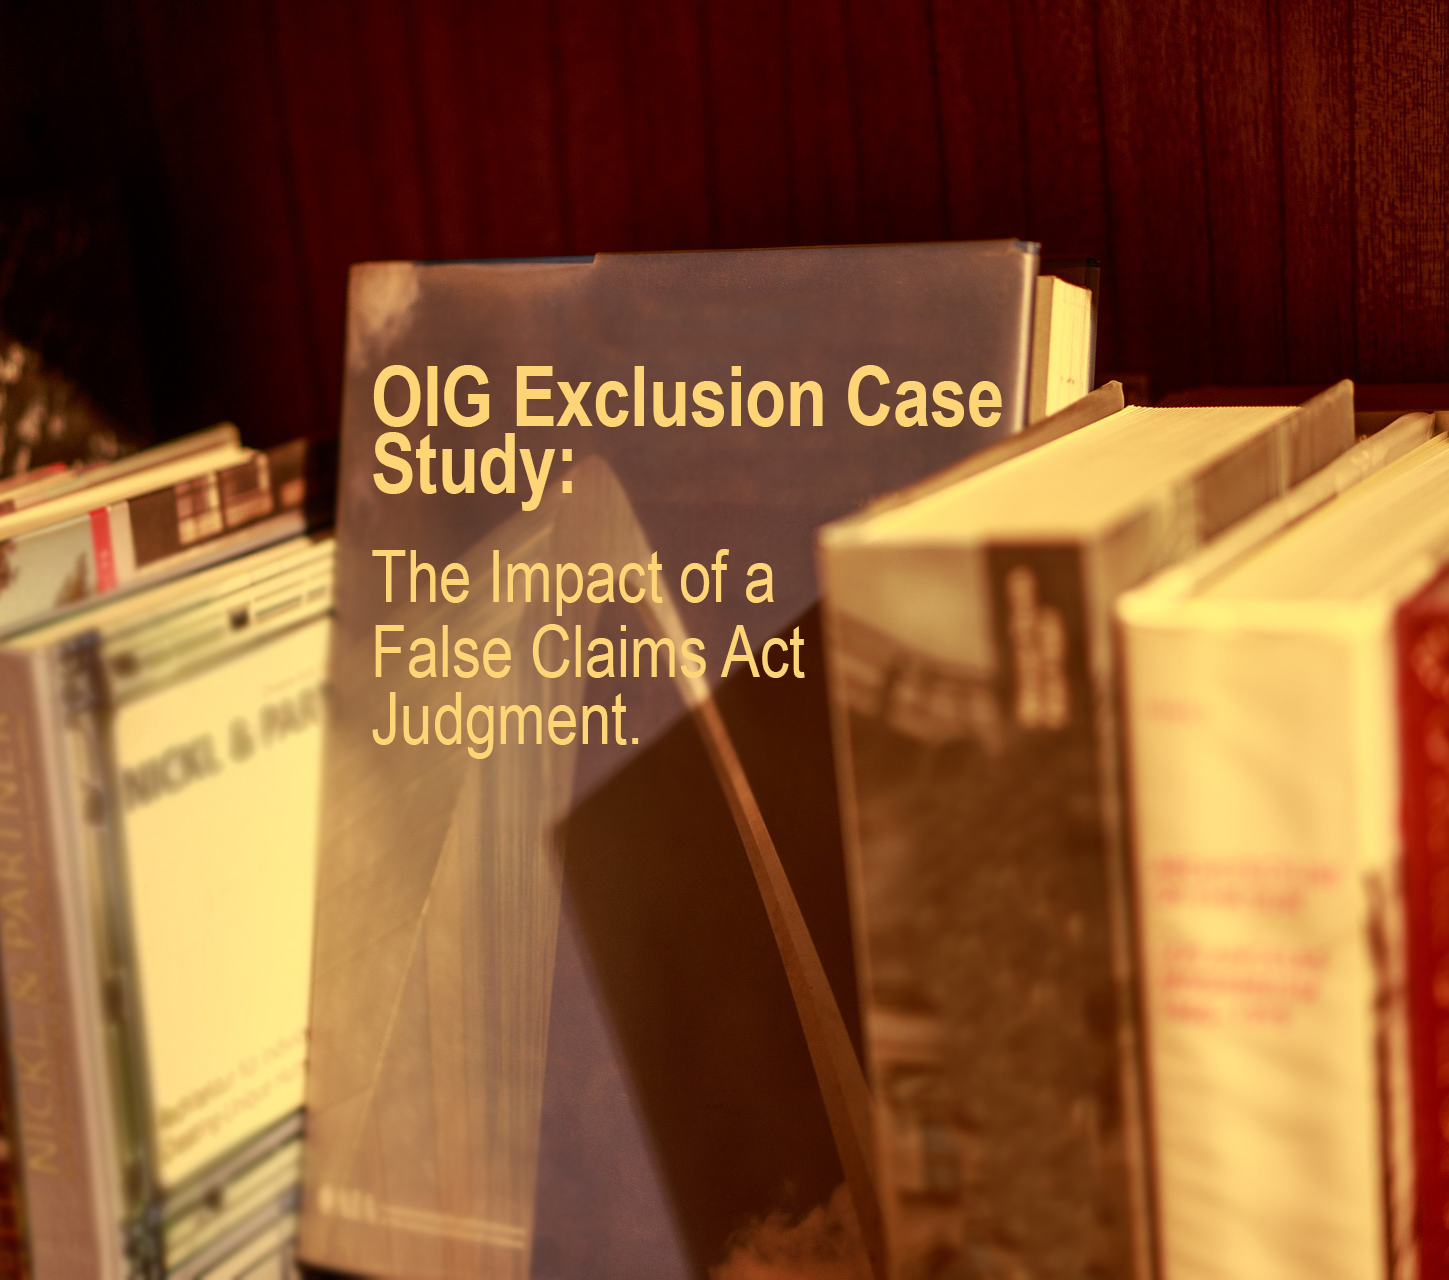 OIG Exclusion Case Study